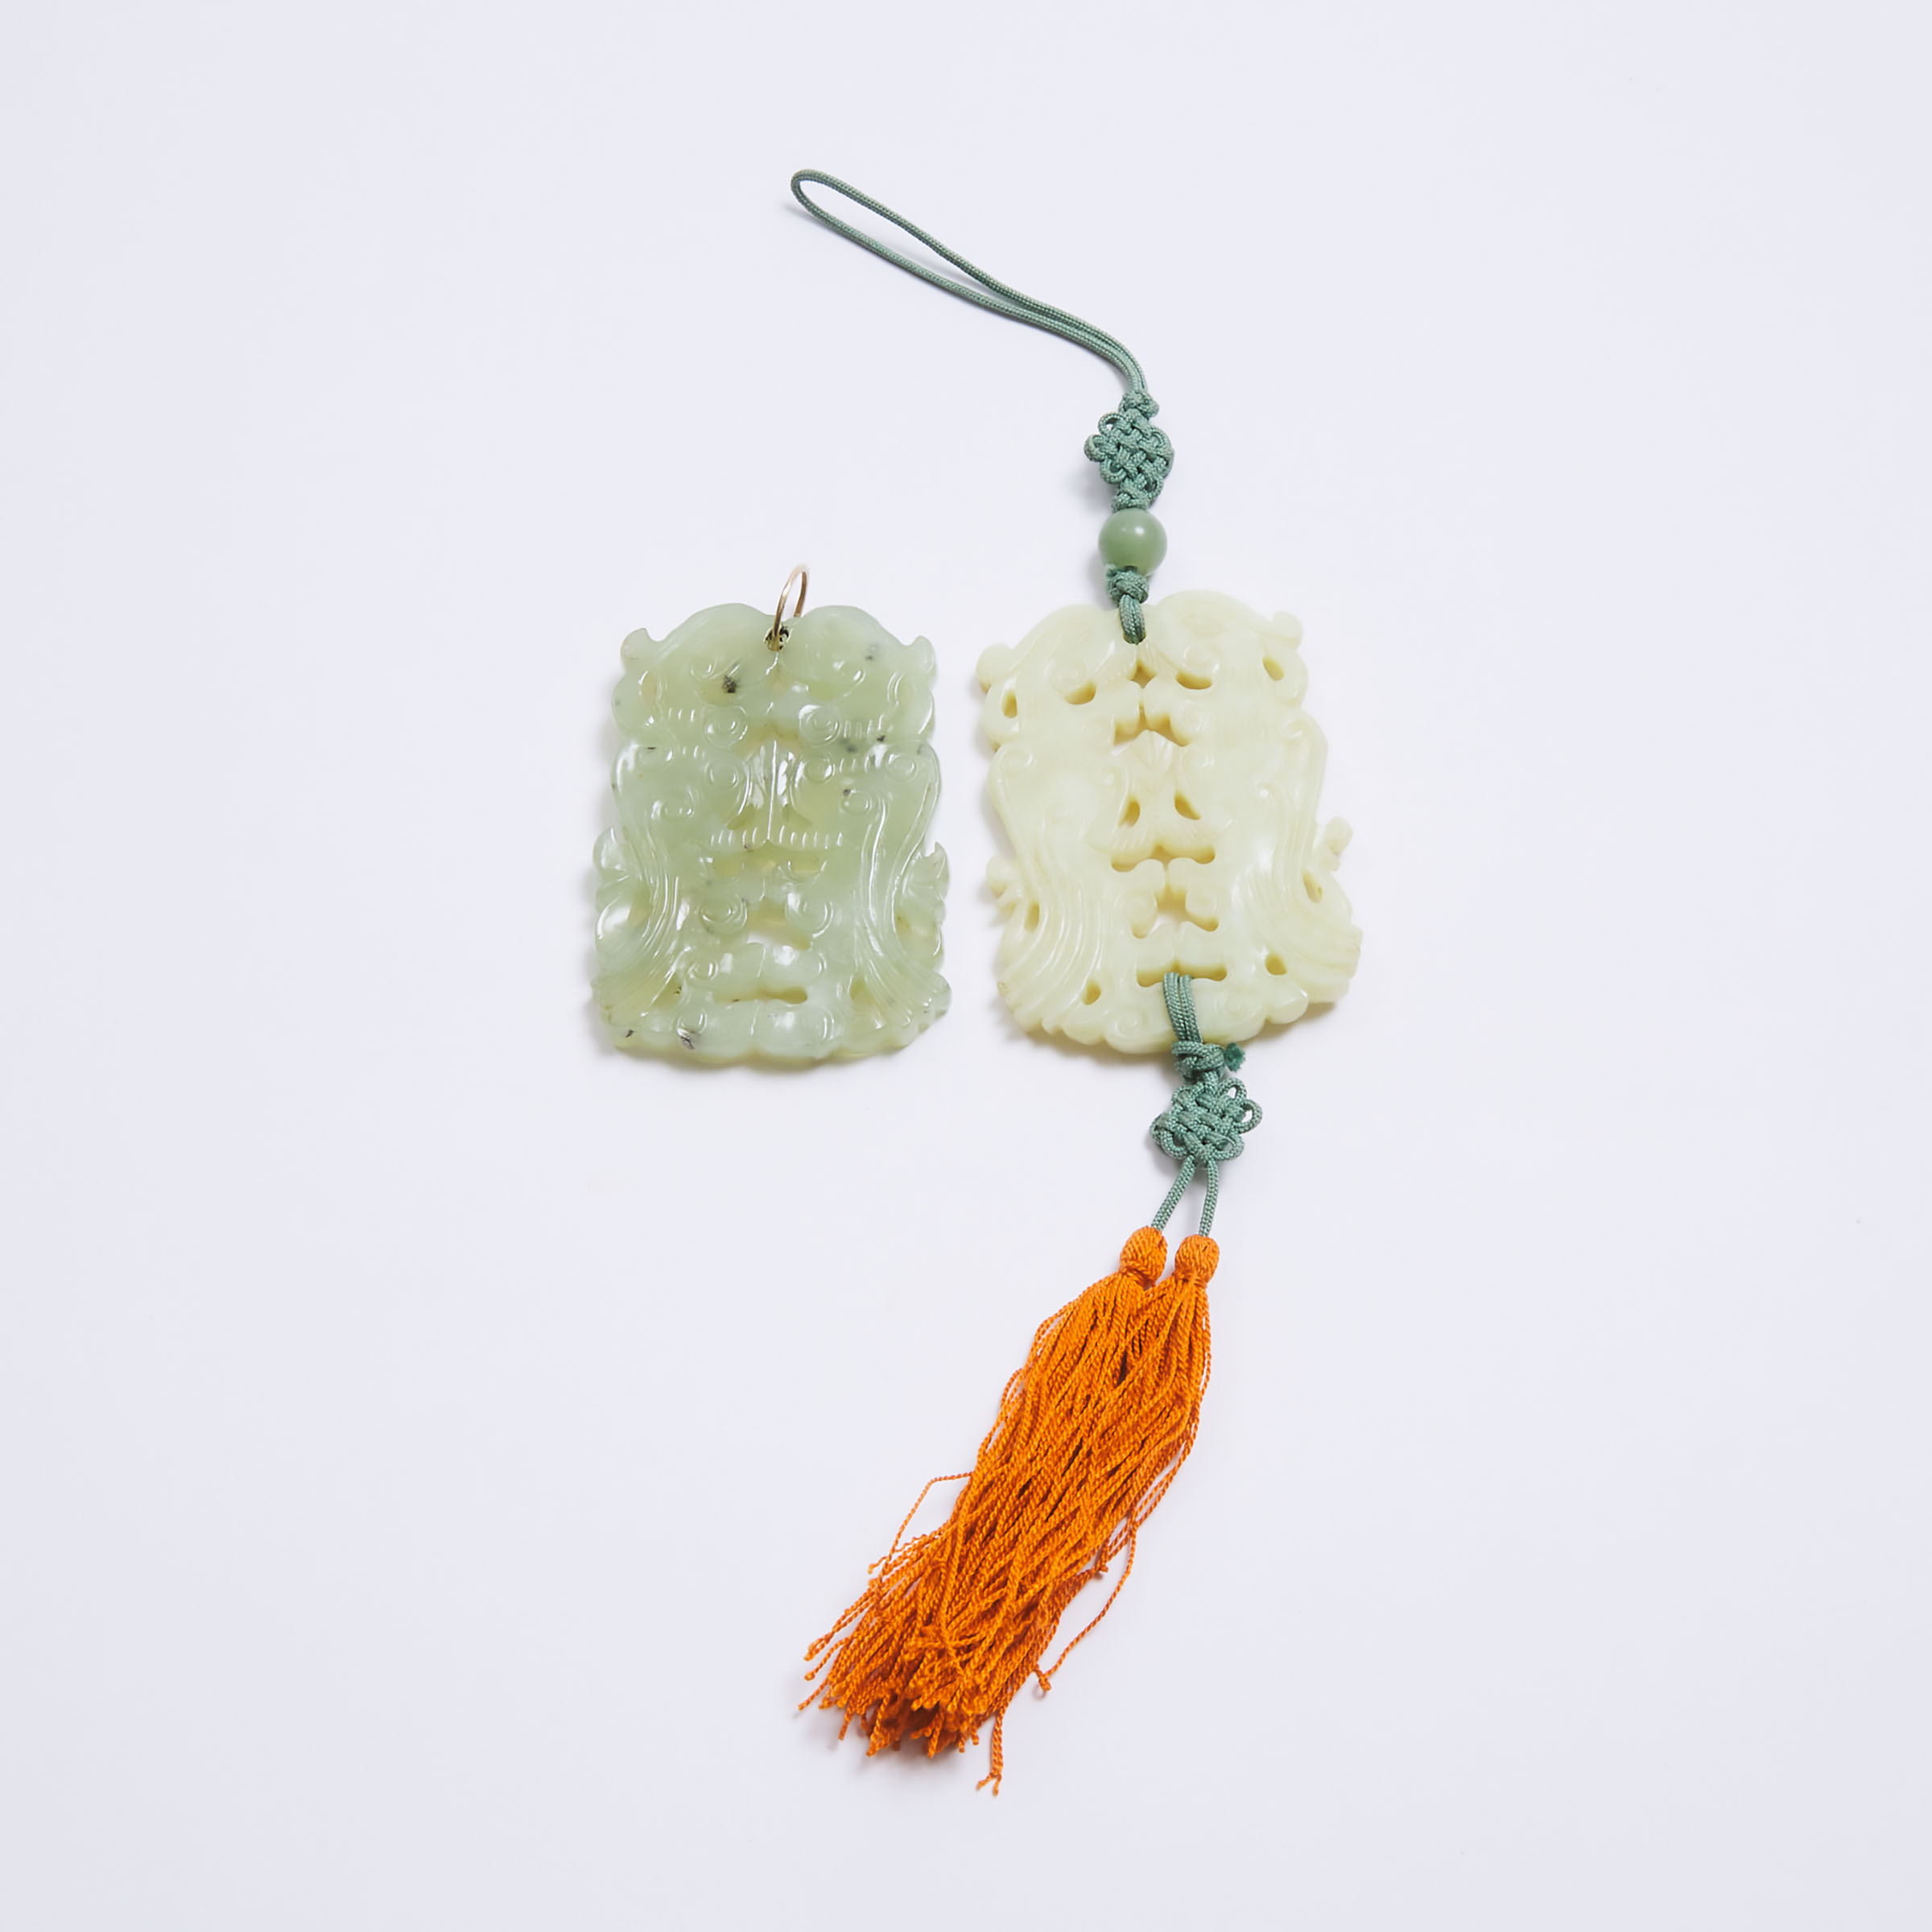 Two Reticulated Jade 'Double Phoenix' Pendants, Early to Mid 20th Century